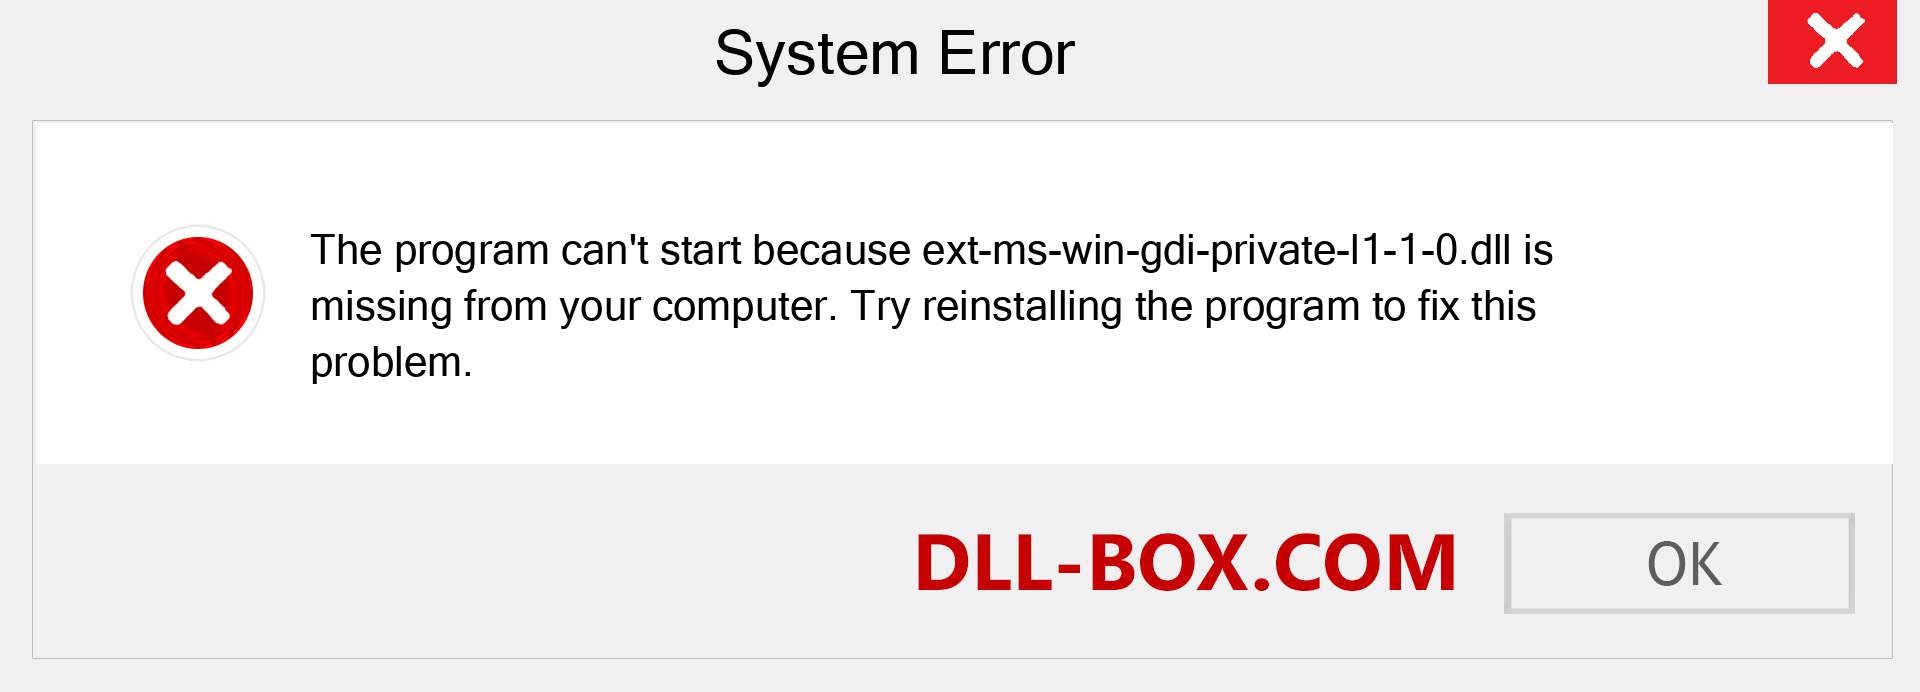  ext-ms-win-gdi-private-l1-1-0.dll file is missing?. Download for Windows 7, 8, 10 - Fix  ext-ms-win-gdi-private-l1-1-0 dll Missing Error on Windows, photos, images